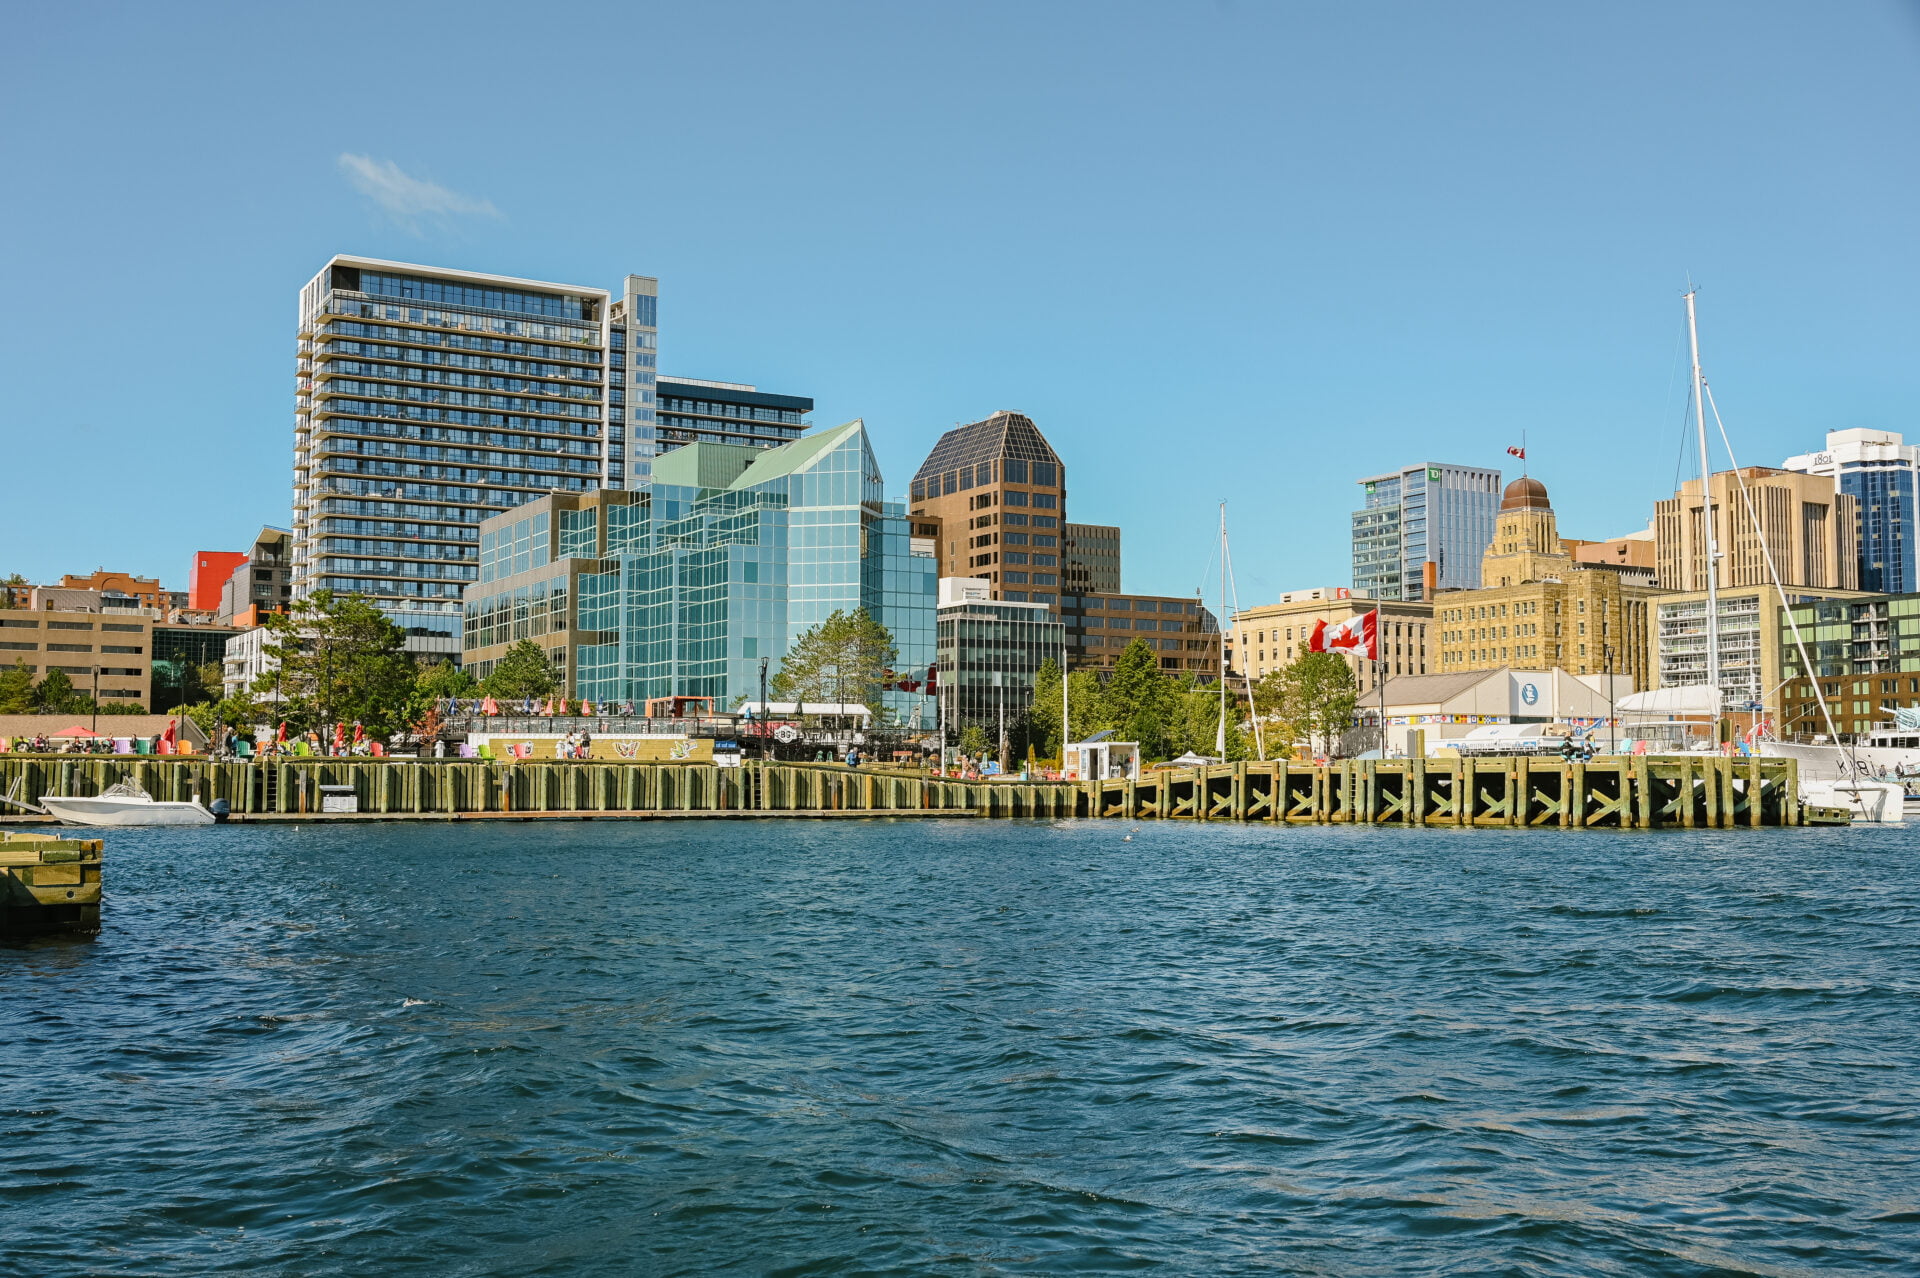 view of downtown halifax from the water on our Nova Scotia RV road trip